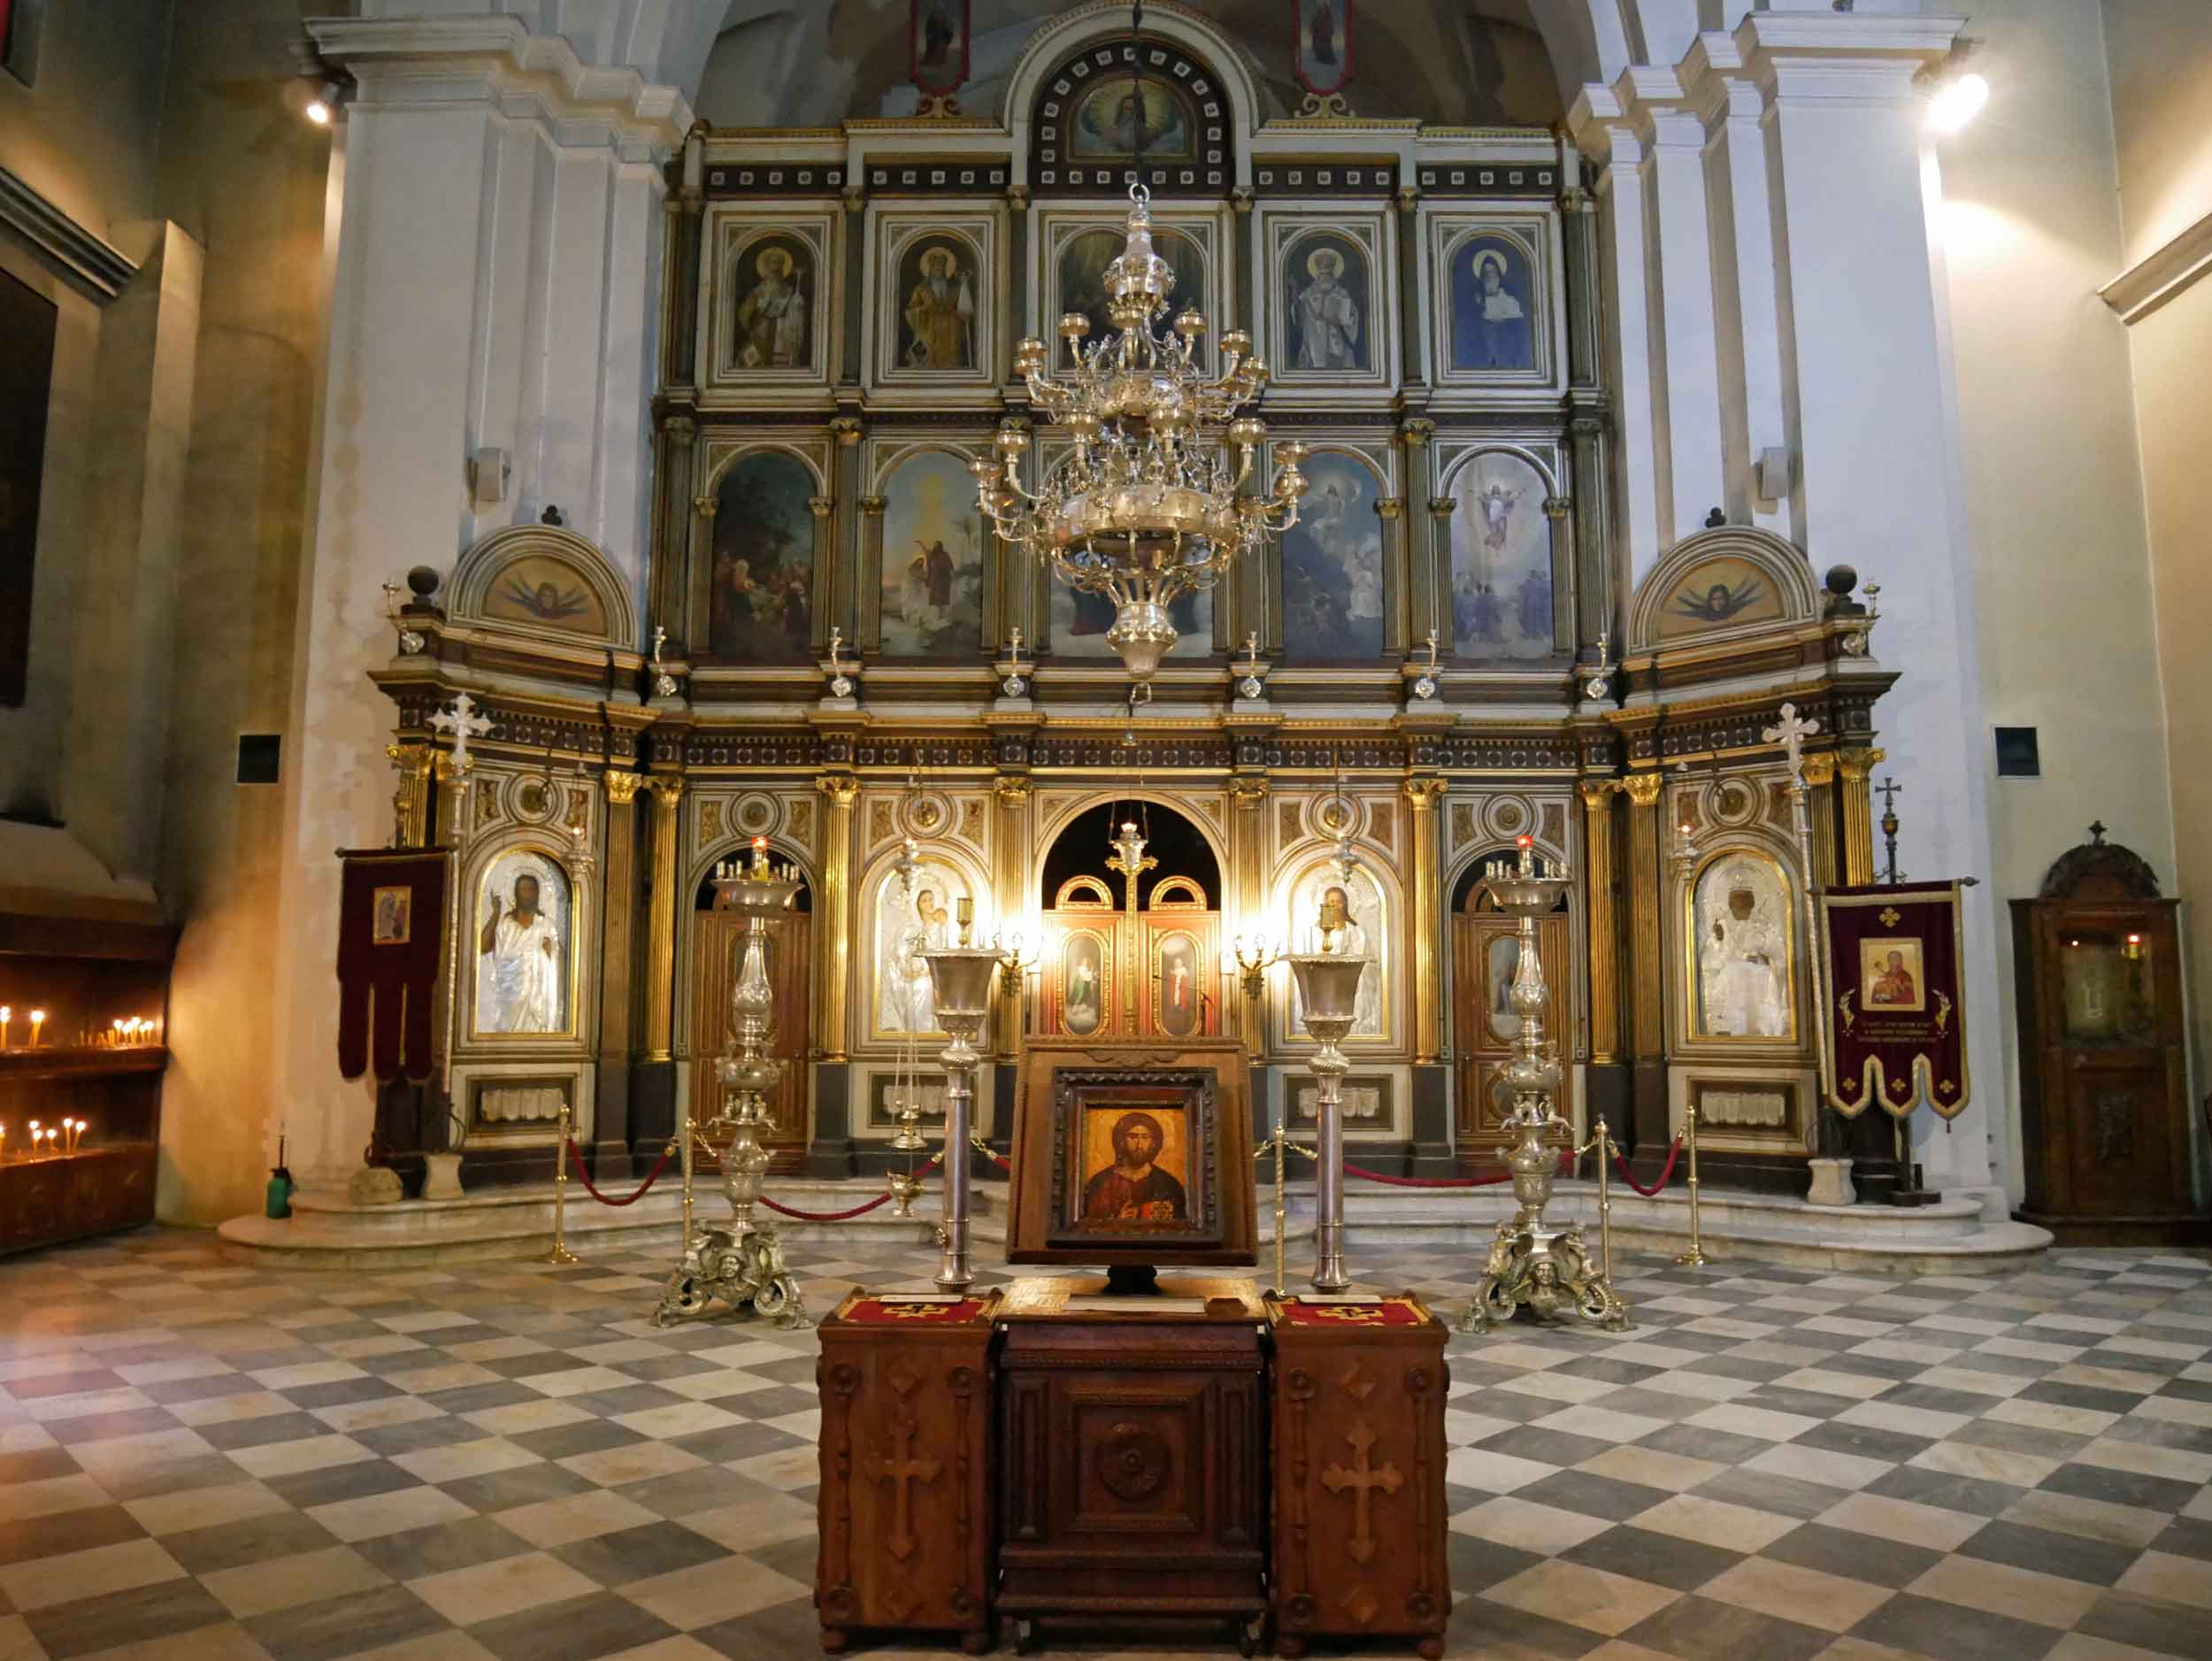  Inside the Church of St. Nicholas, which was built in more recent times, an impressive display of religious icons decorates the alter.&nbsp; 